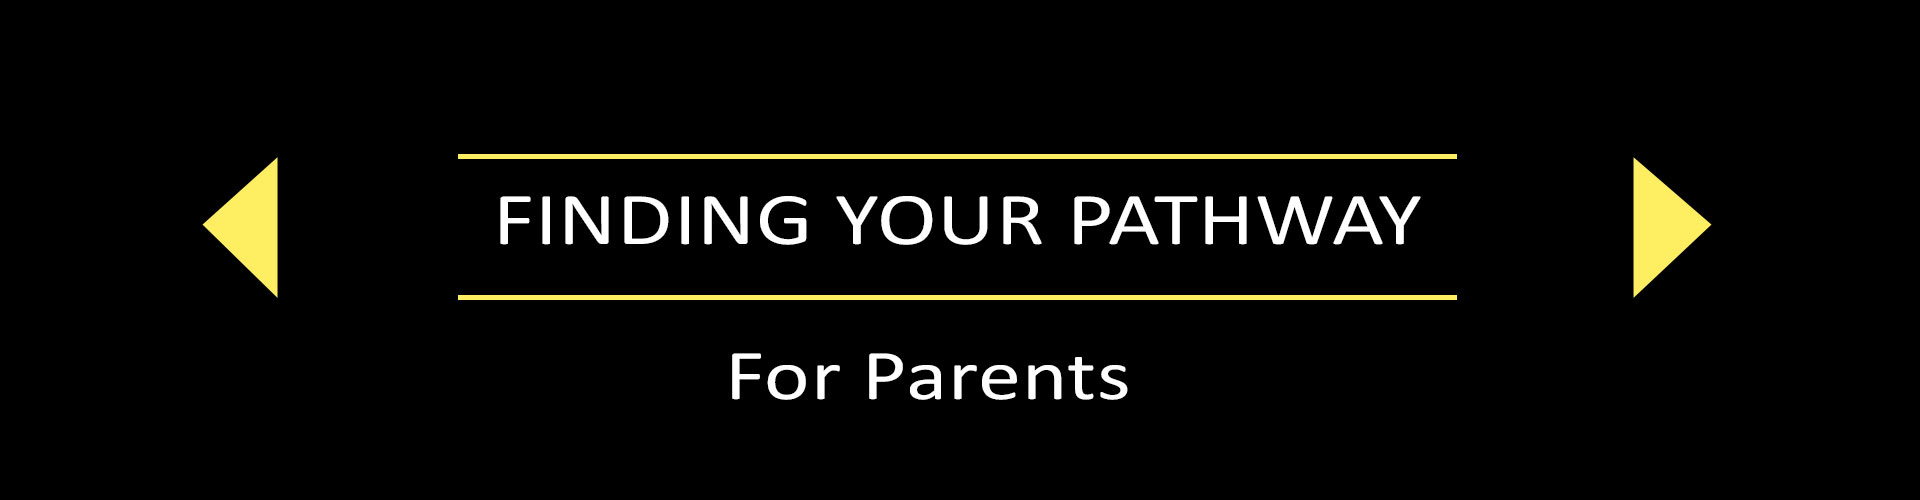 Finding Your Pathway for Parents